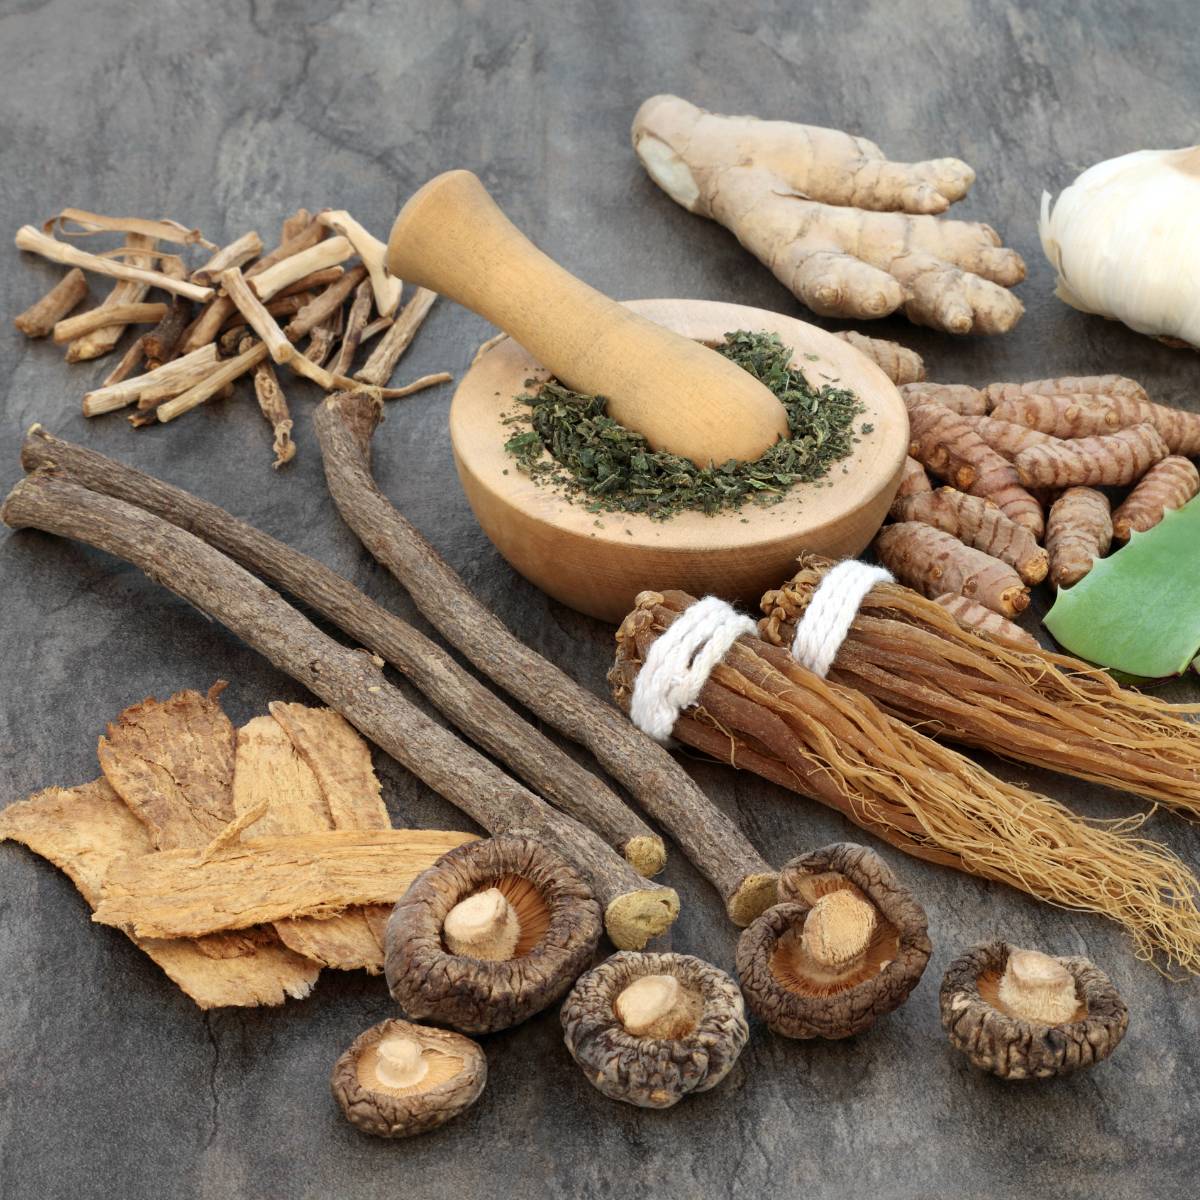 What Are The Best Adaptogens?